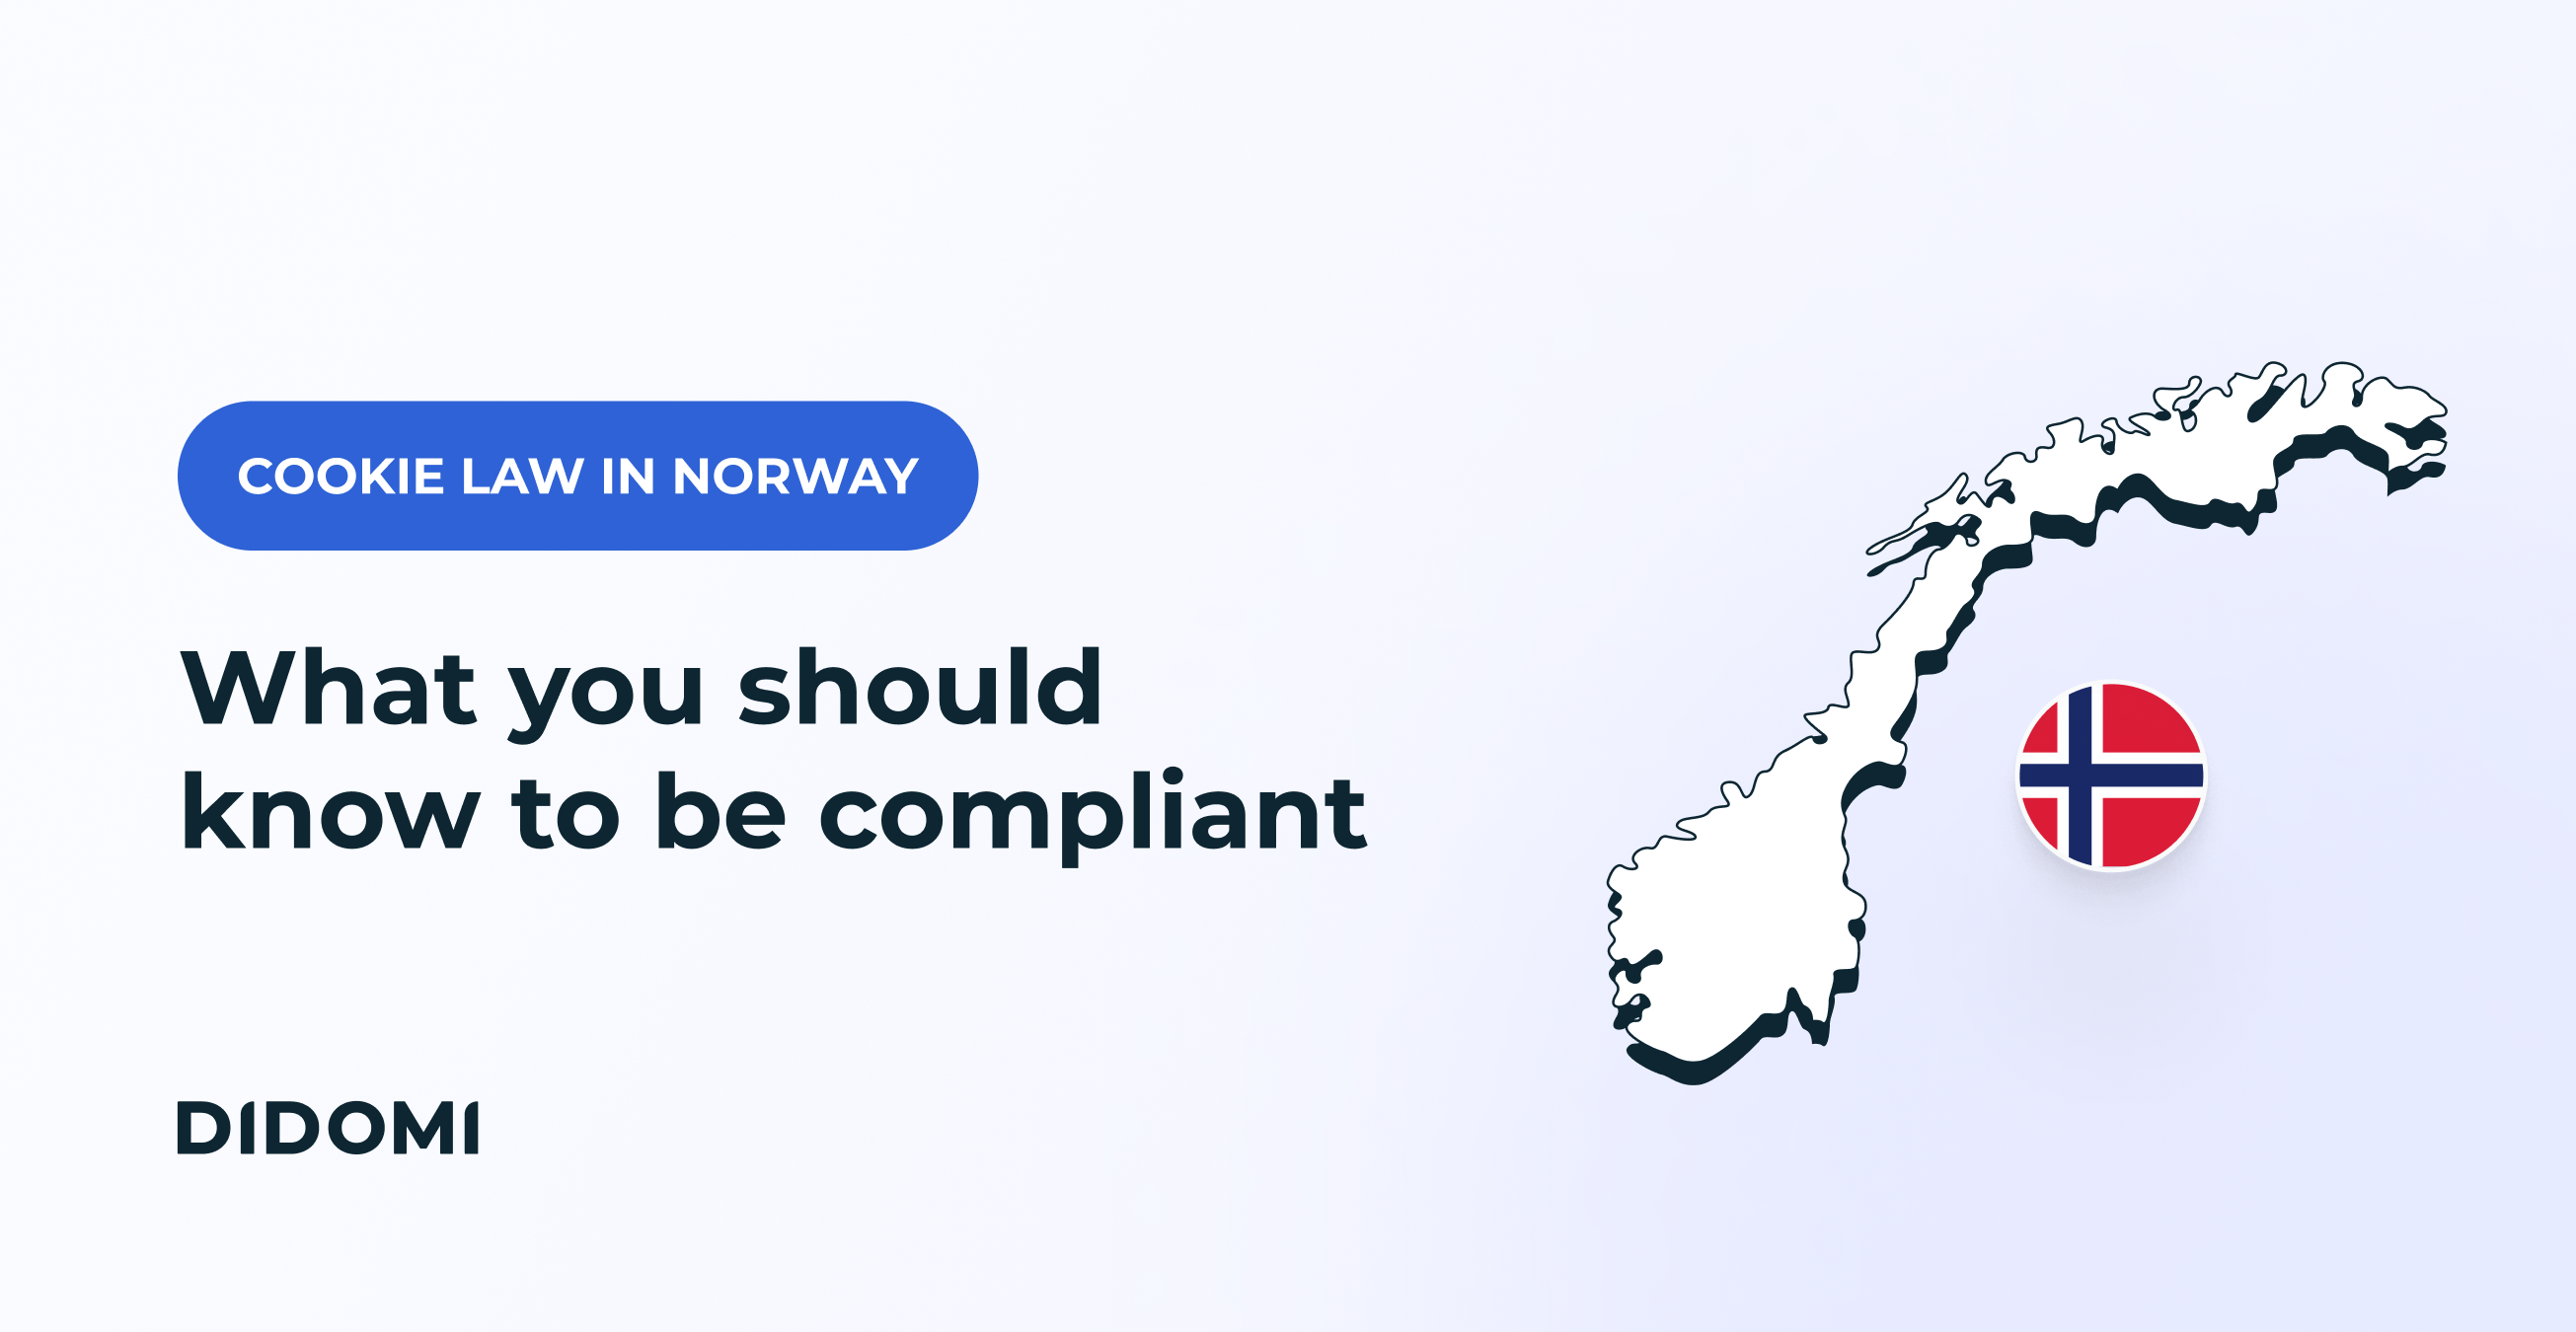 Didomi - Cookie law in Norway: what you should know to be compliant